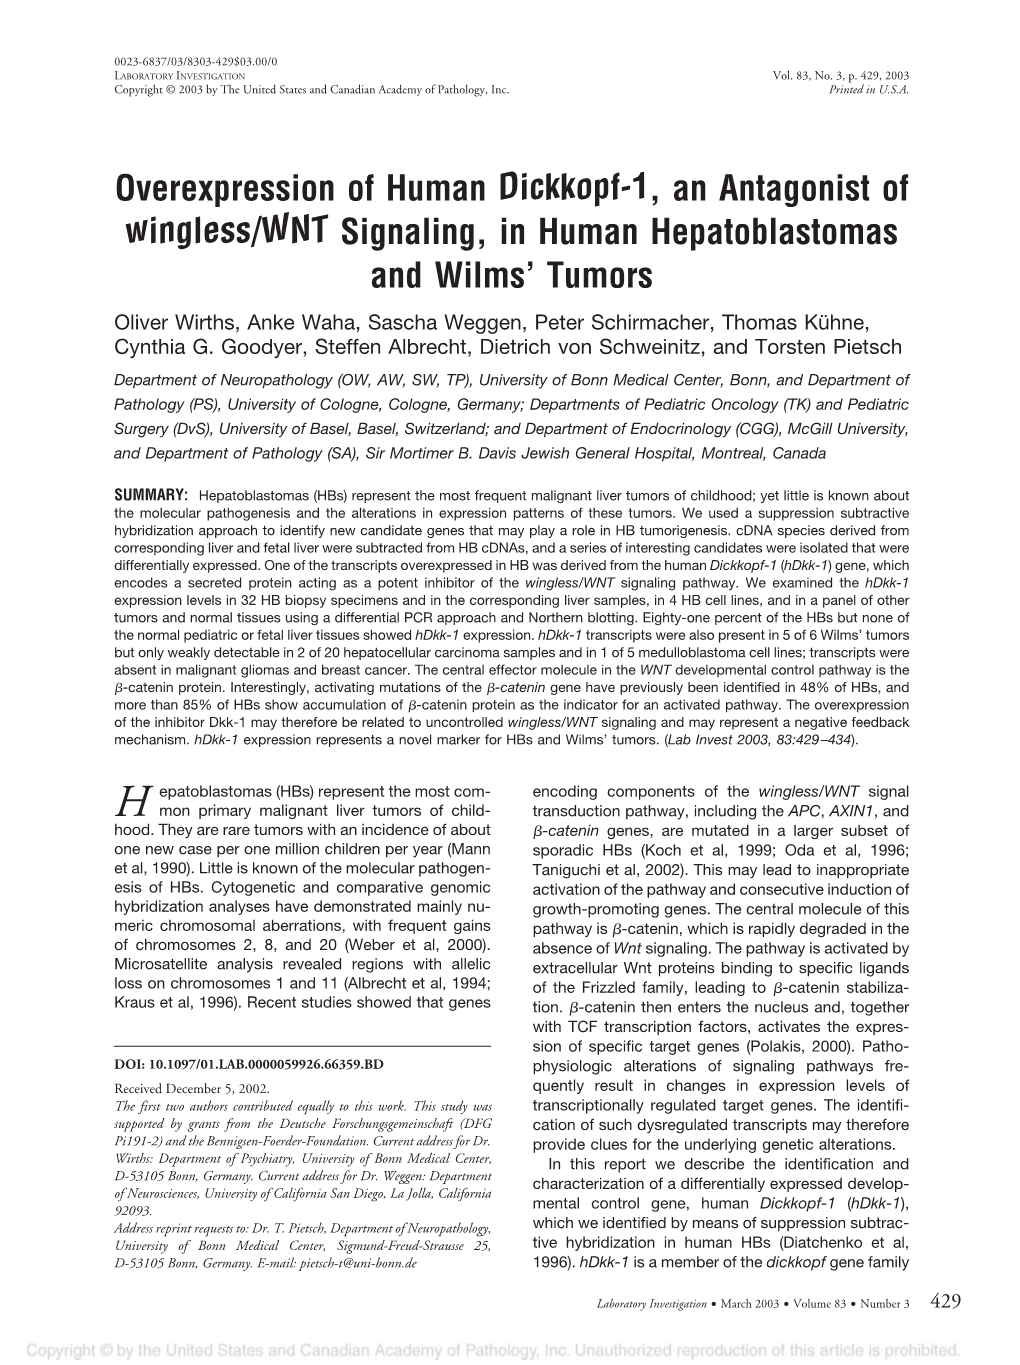 Overexpression of Human Dickkopf-1, an Antagonist of Wingless/WNT